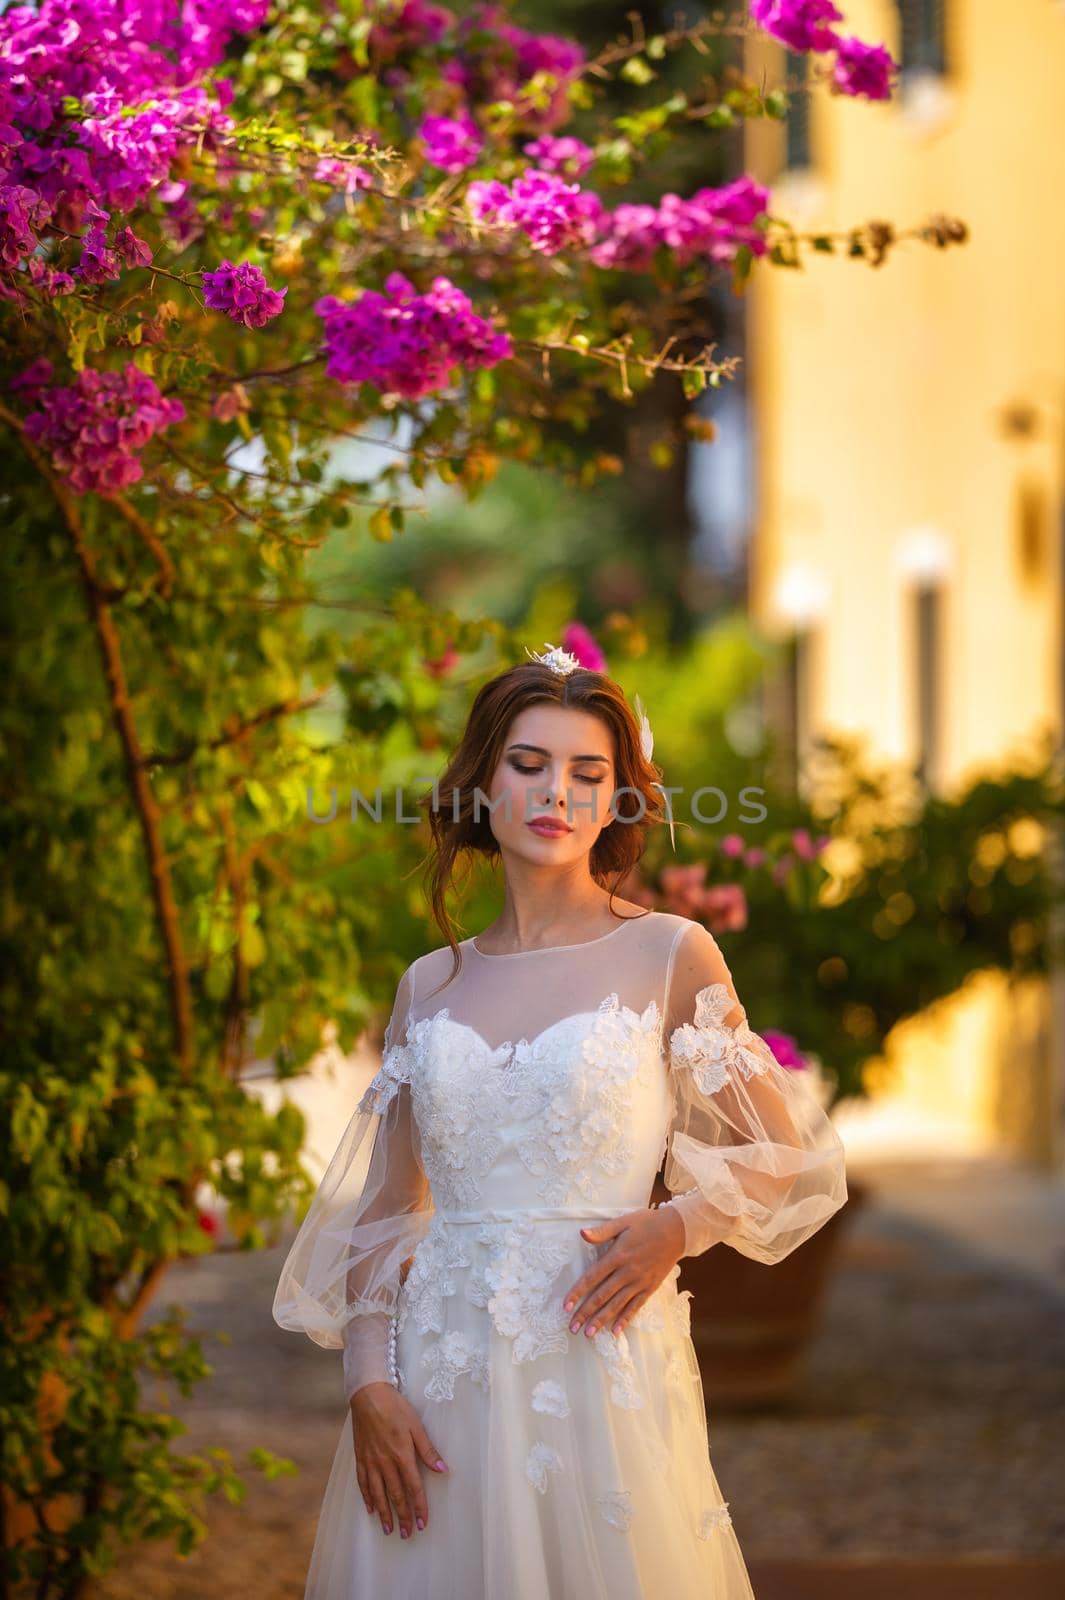 Stylish young bride on her wedding day in Italy.elegant Bride from Tuscany.Bride in a white wedding dress.